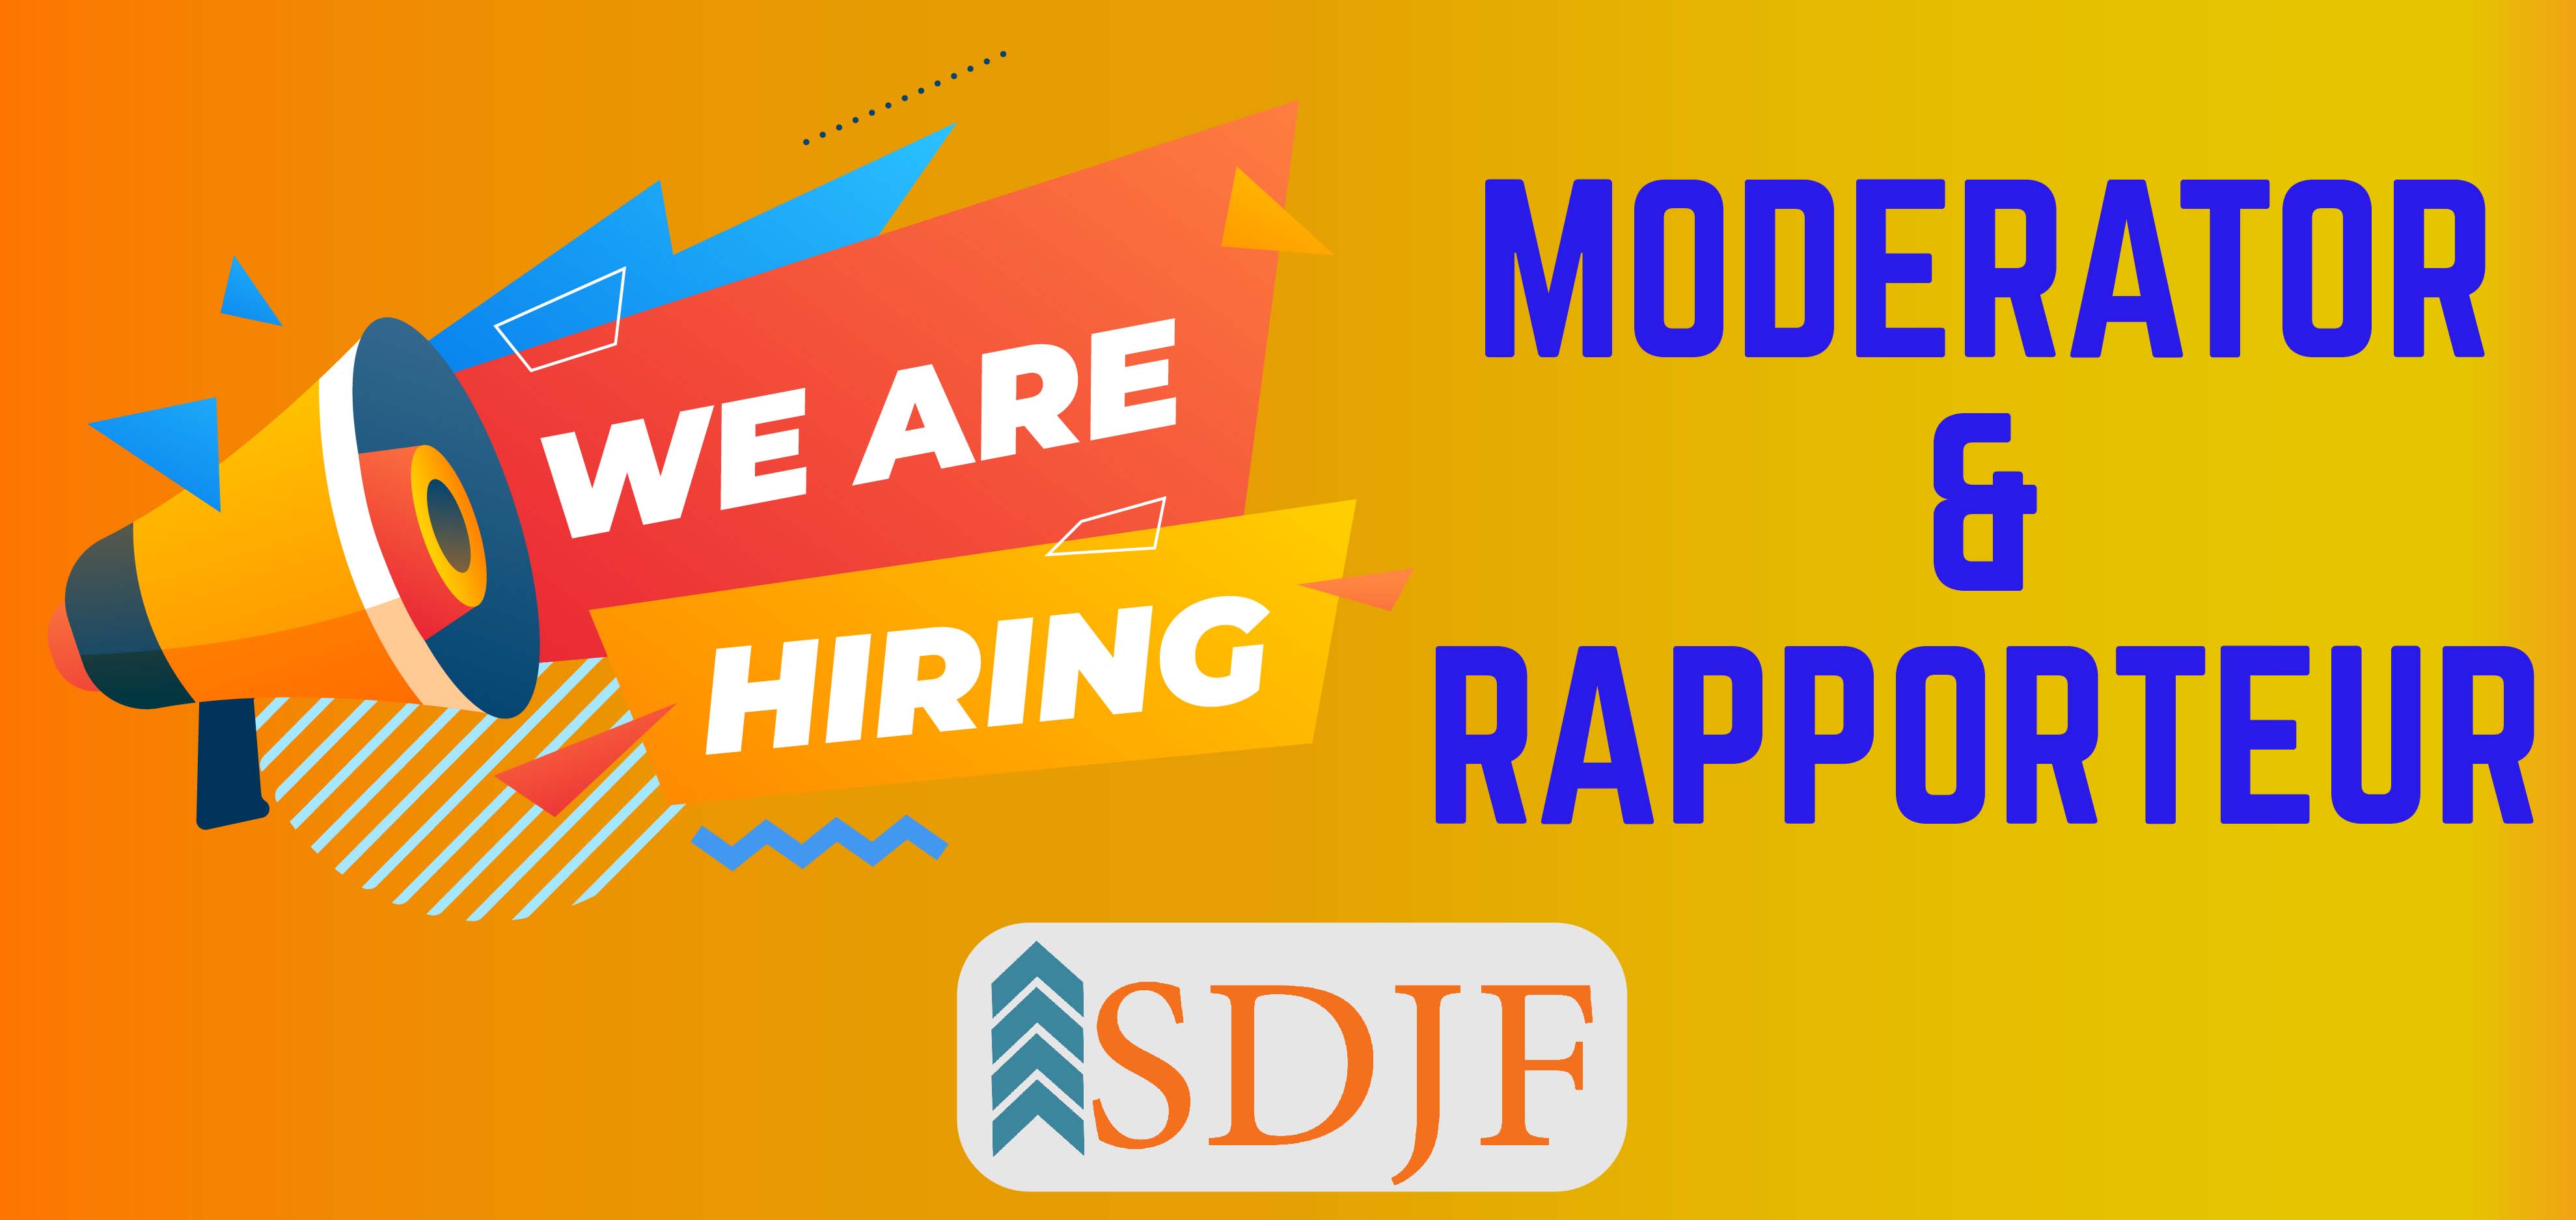 We are Hiring Moderator & Rapporteur 